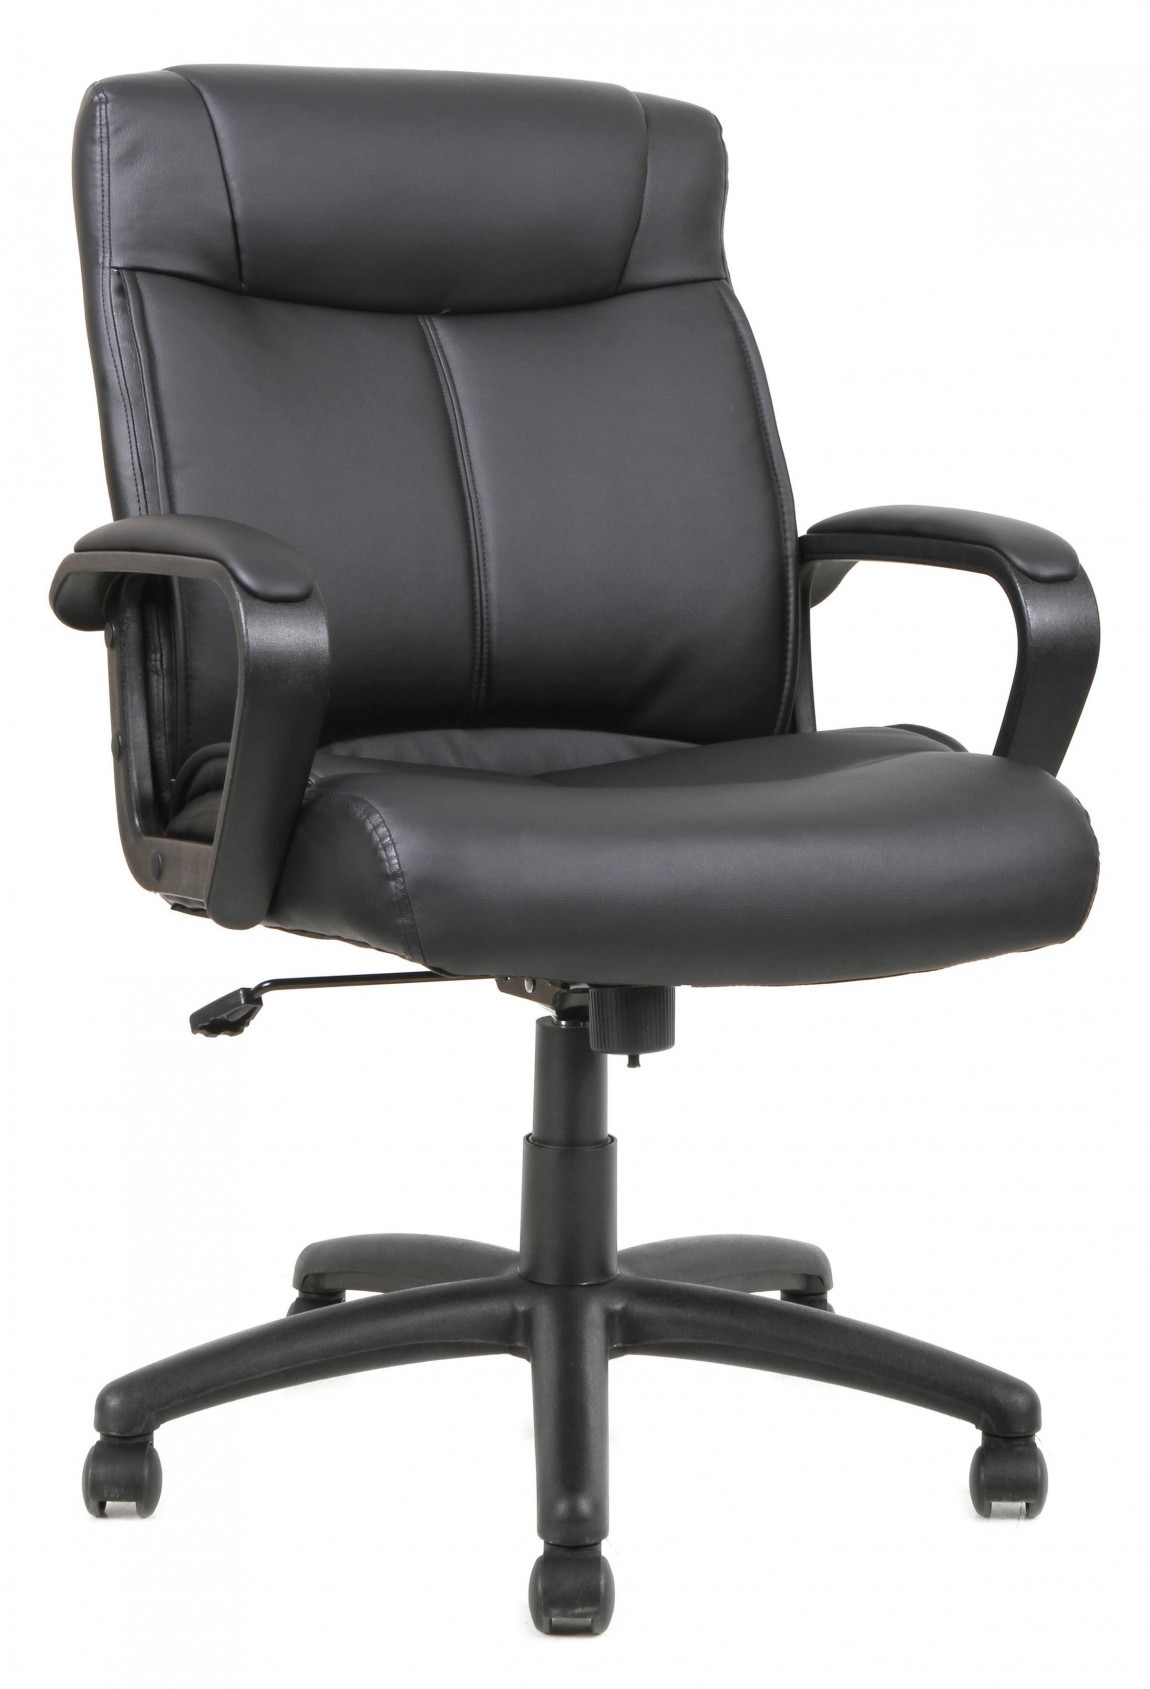 Black Primo Mid Back Conference Room Chair With Arms By Harmony Collection